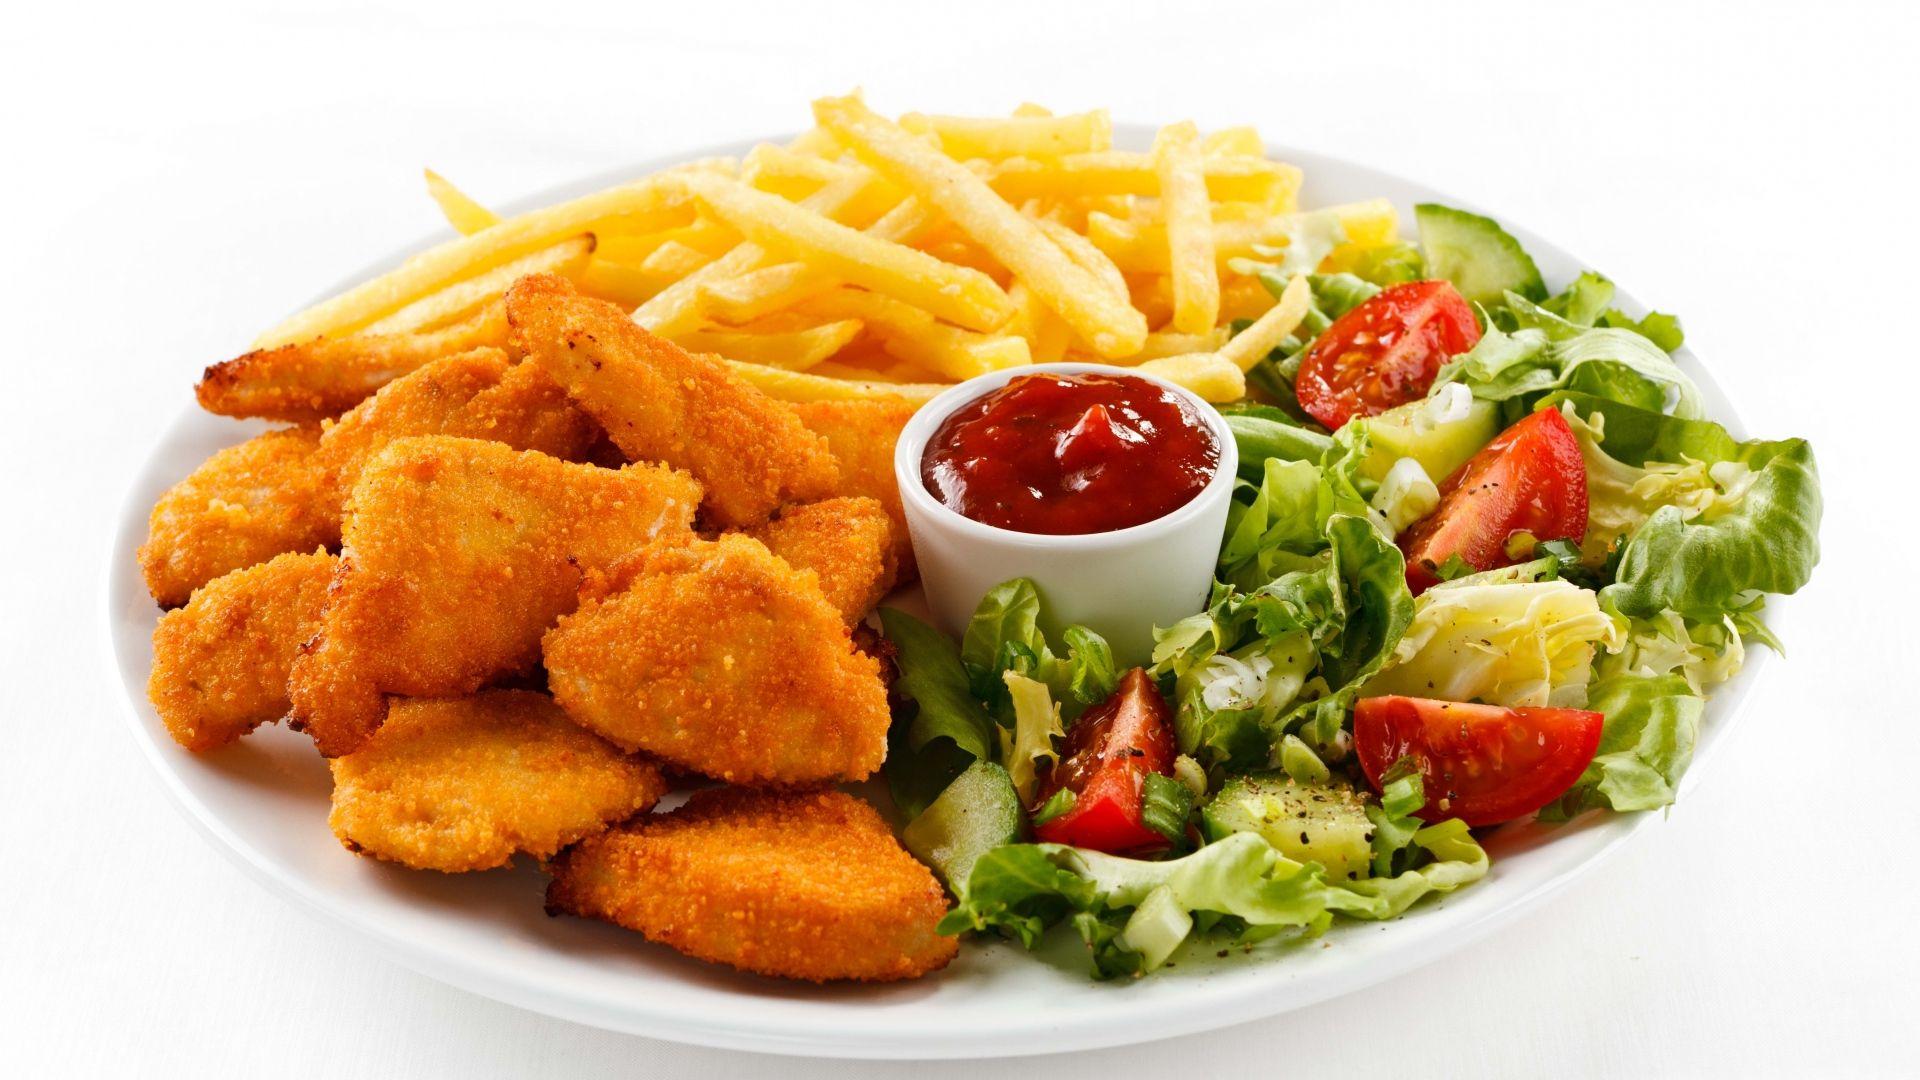 Download Wallpaper Chicken wings, Plate, Ketchup, Lettuce